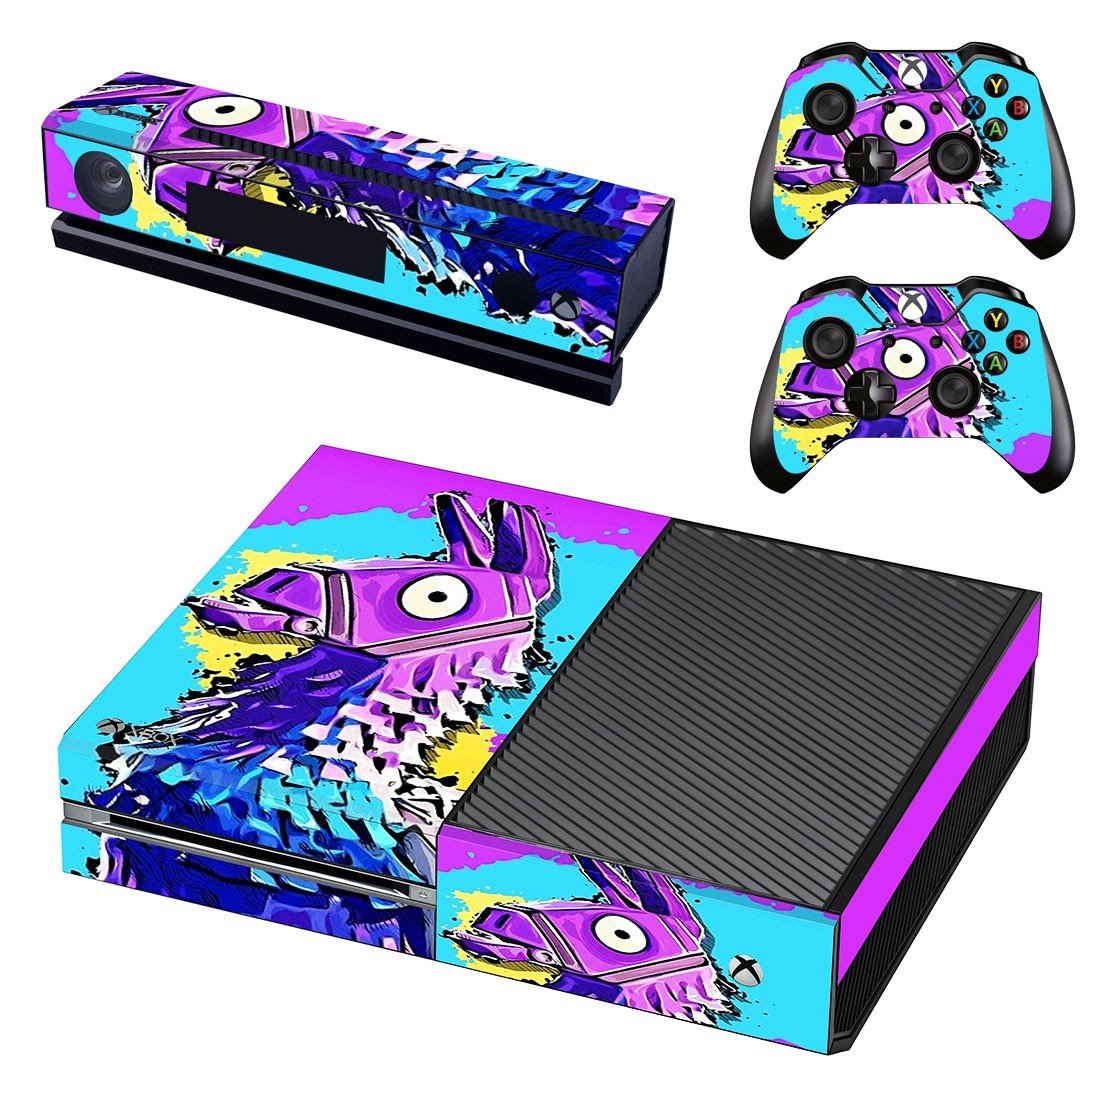 Fortnite Decal Skin Sticker For Xbox One Console And Controllers